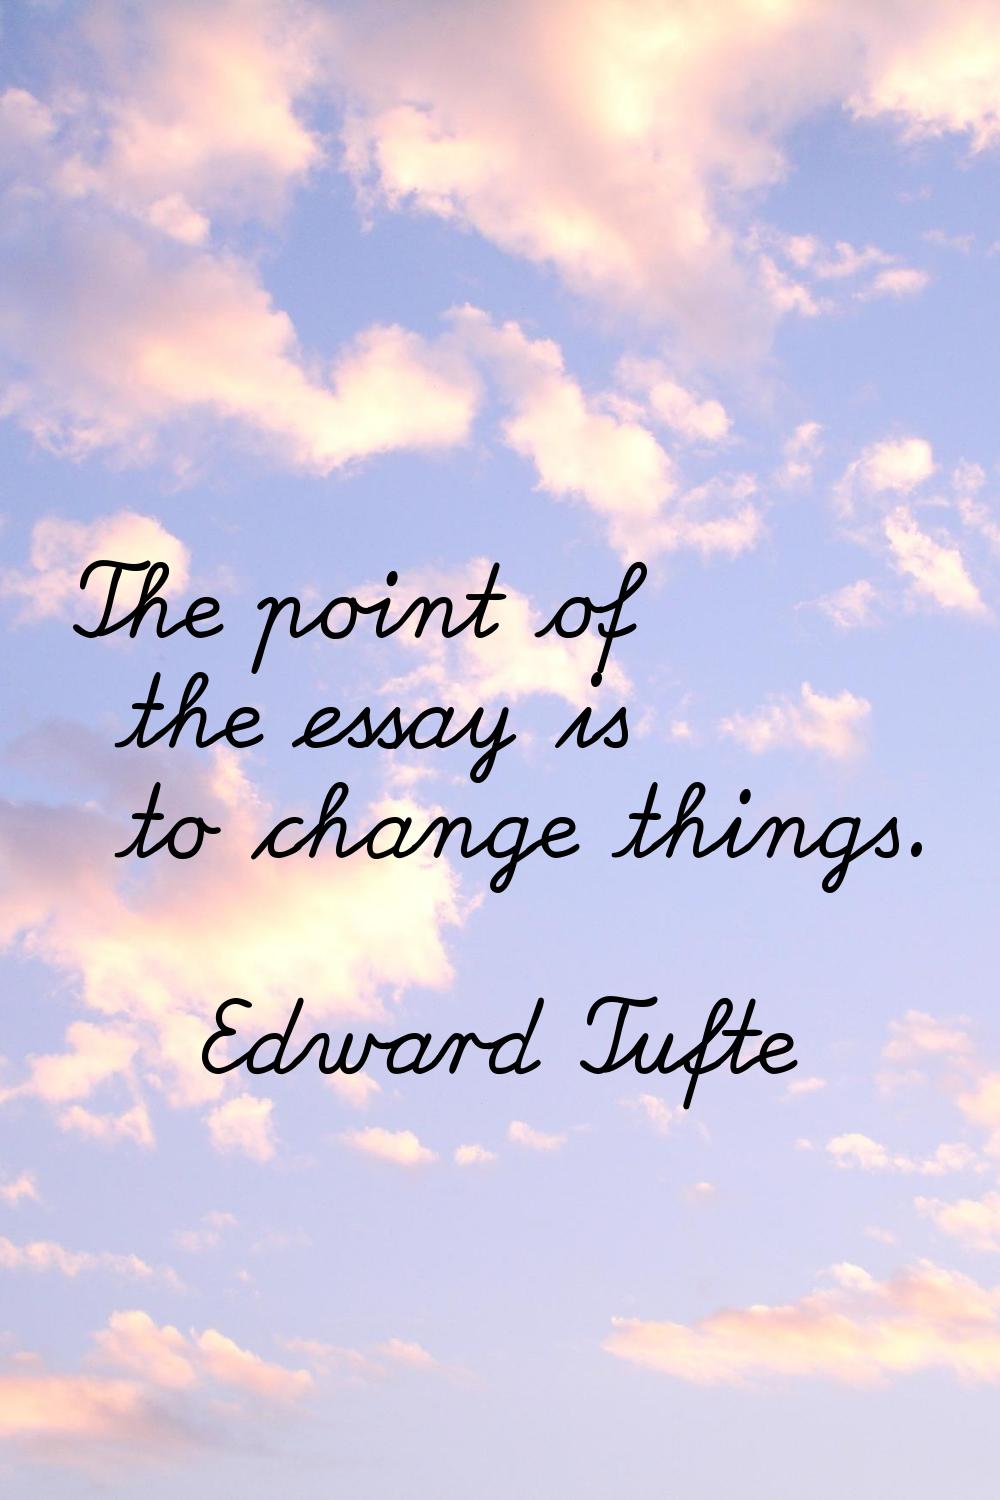 The point of the essay is to change things.